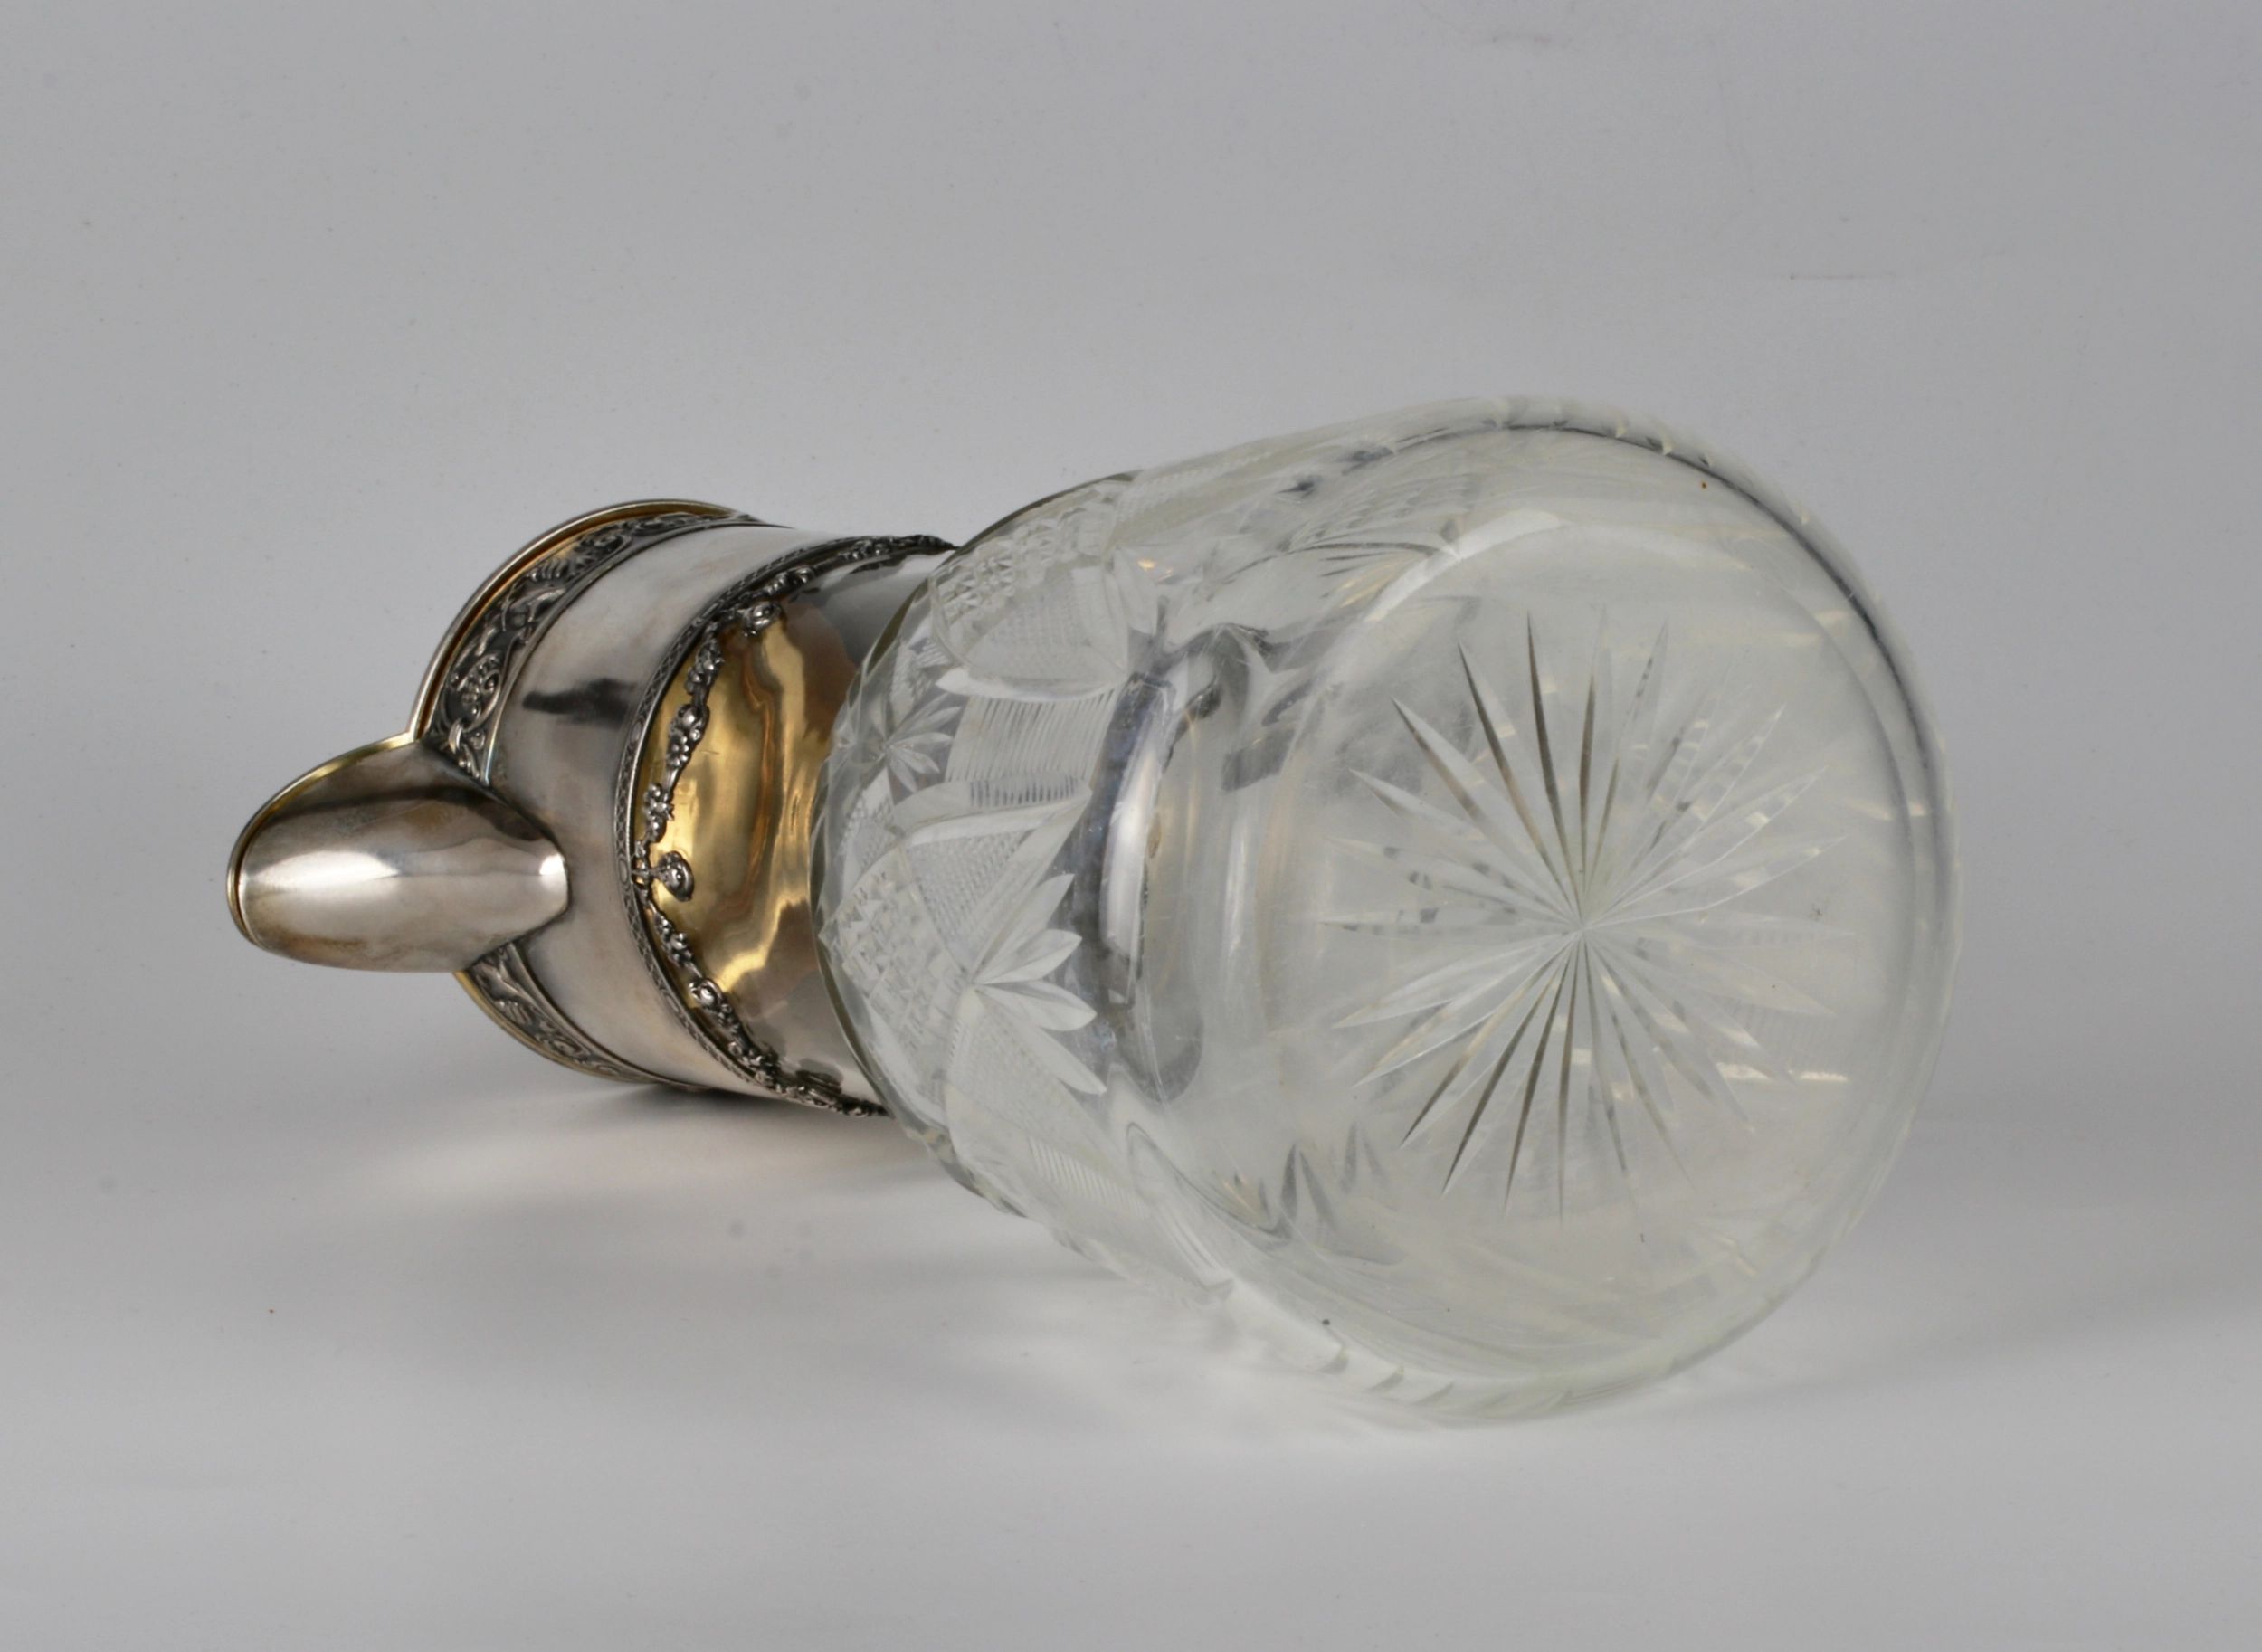 Crystal jug in silver. 13th Artel. Moscow - Image 10 of 11